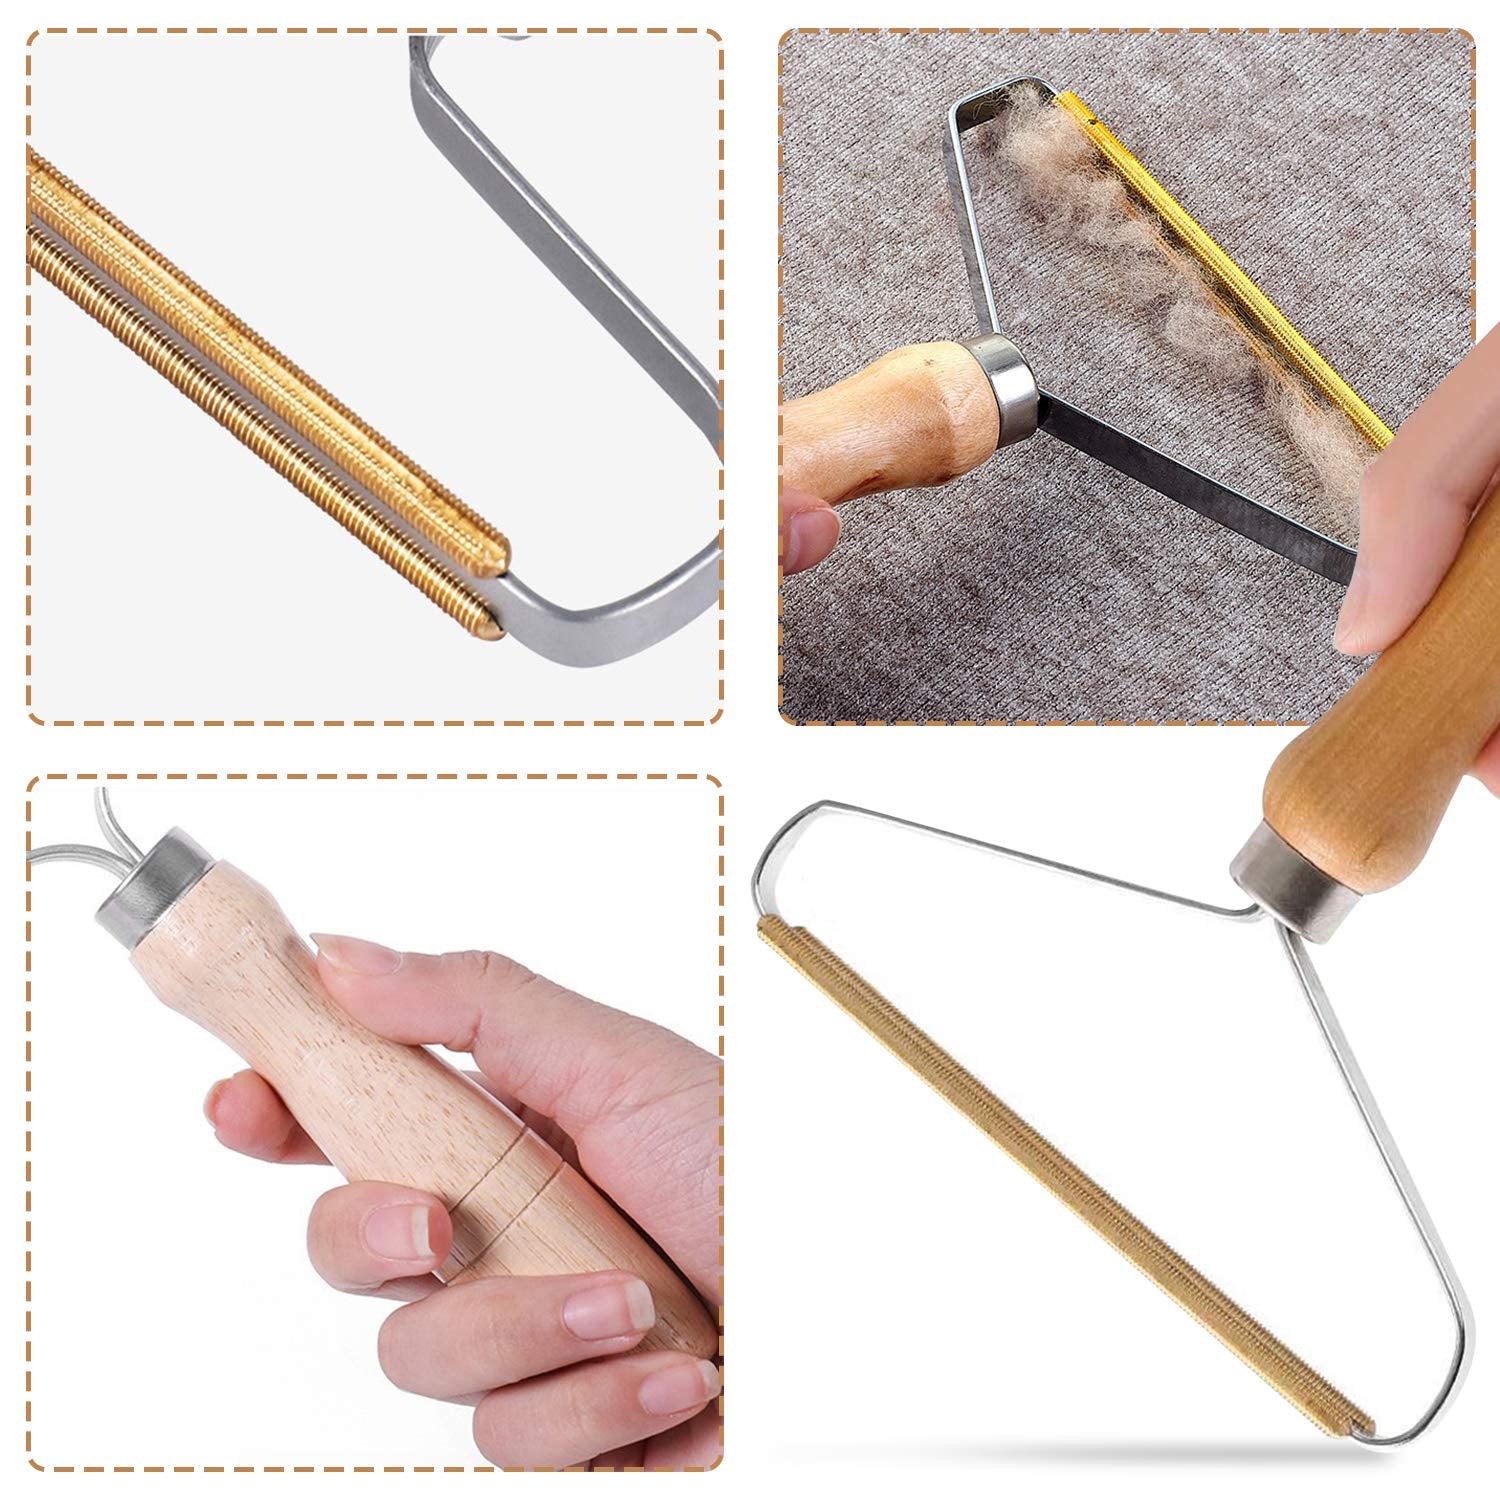 Manual Hair Removal Tool For Removing Pets Hair From Clothes Cushions Soft Furnishings Hair Lint Sticking Roller Handy Home Gadgets Pets Accessories